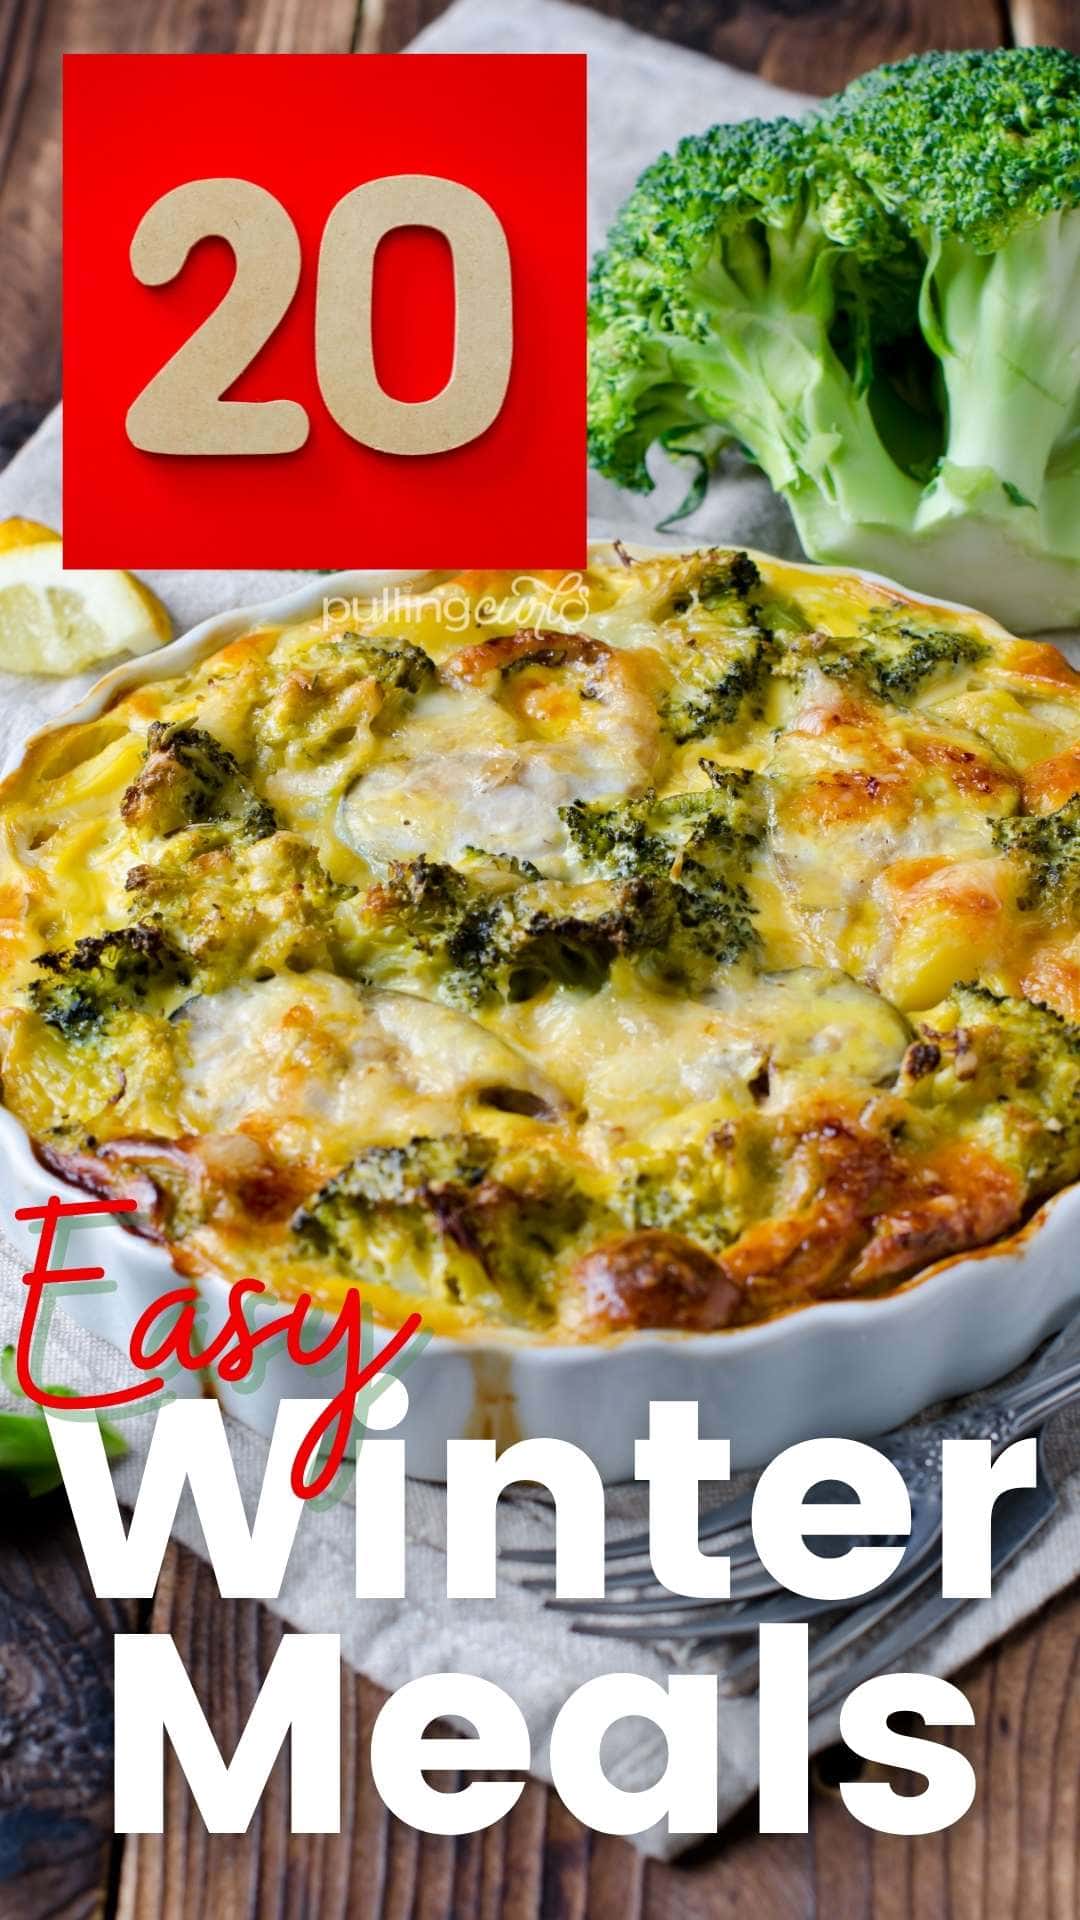 Easy winter meals includes soups, casseroles, and more.  These hearty winter recipes might even give you some winter lunch ideas for work too. via @pullingcurls